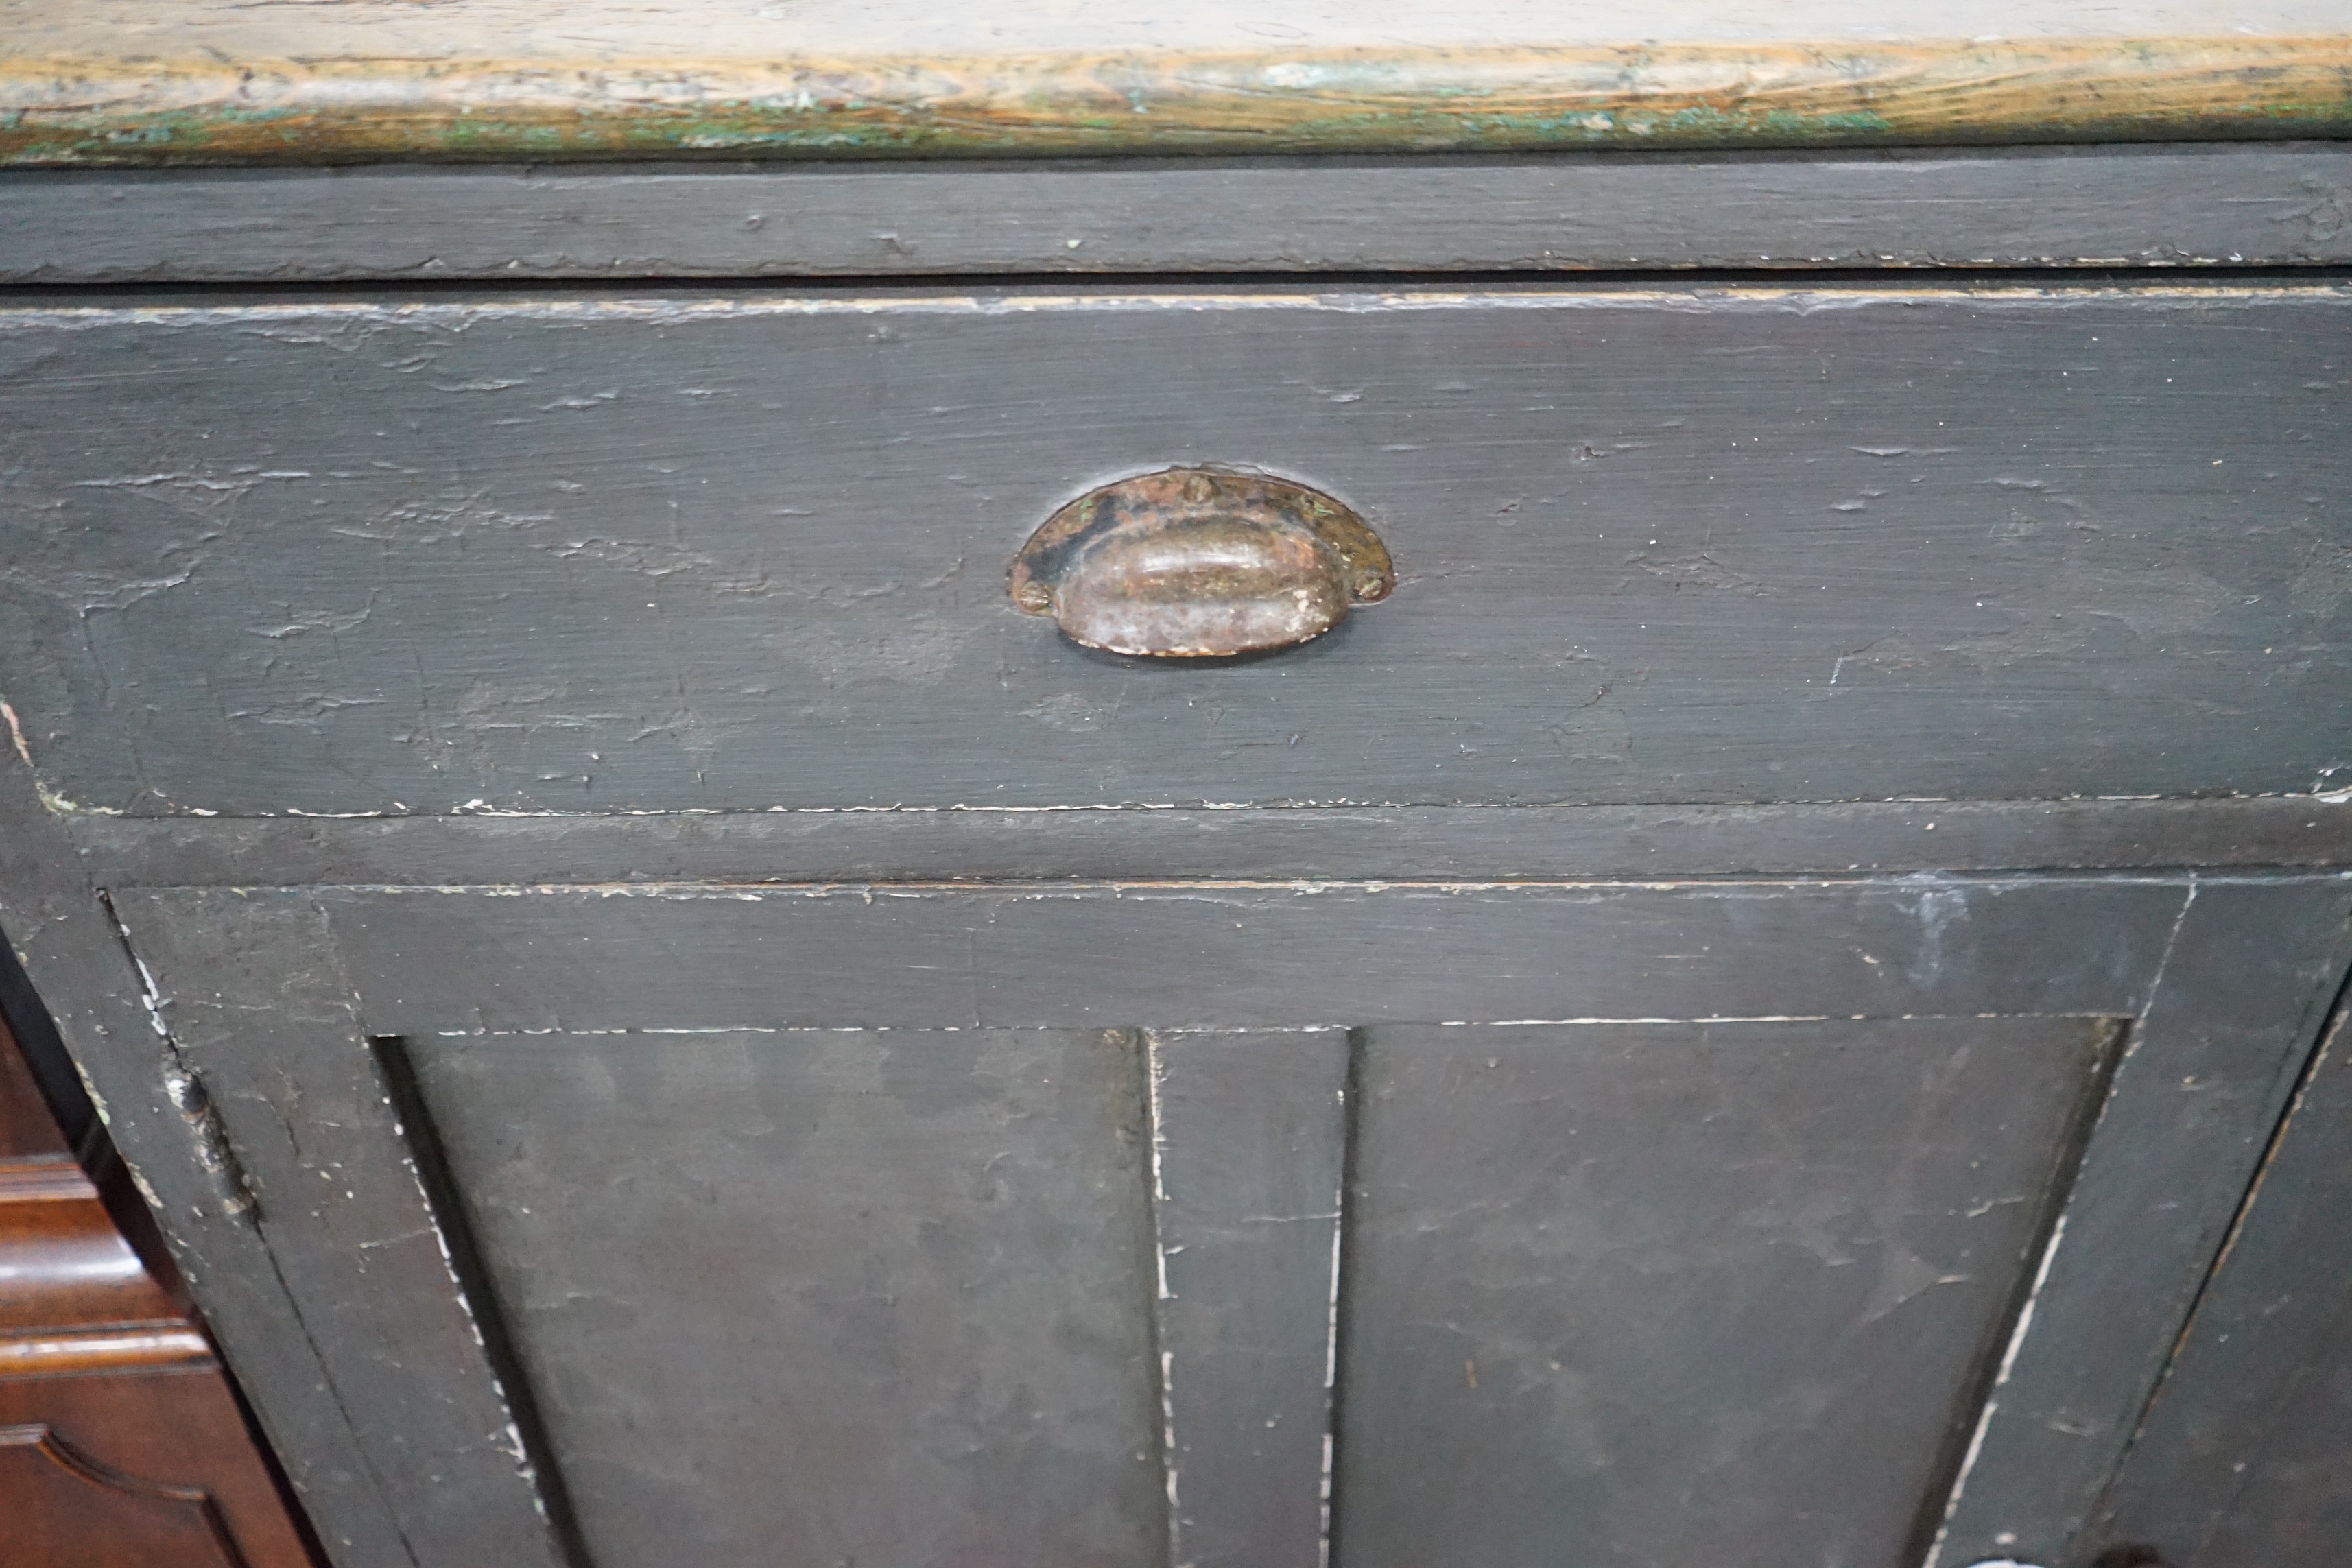 A Victorian painted pine side cabinet, width 140cm, depth 40cm, height 103cm